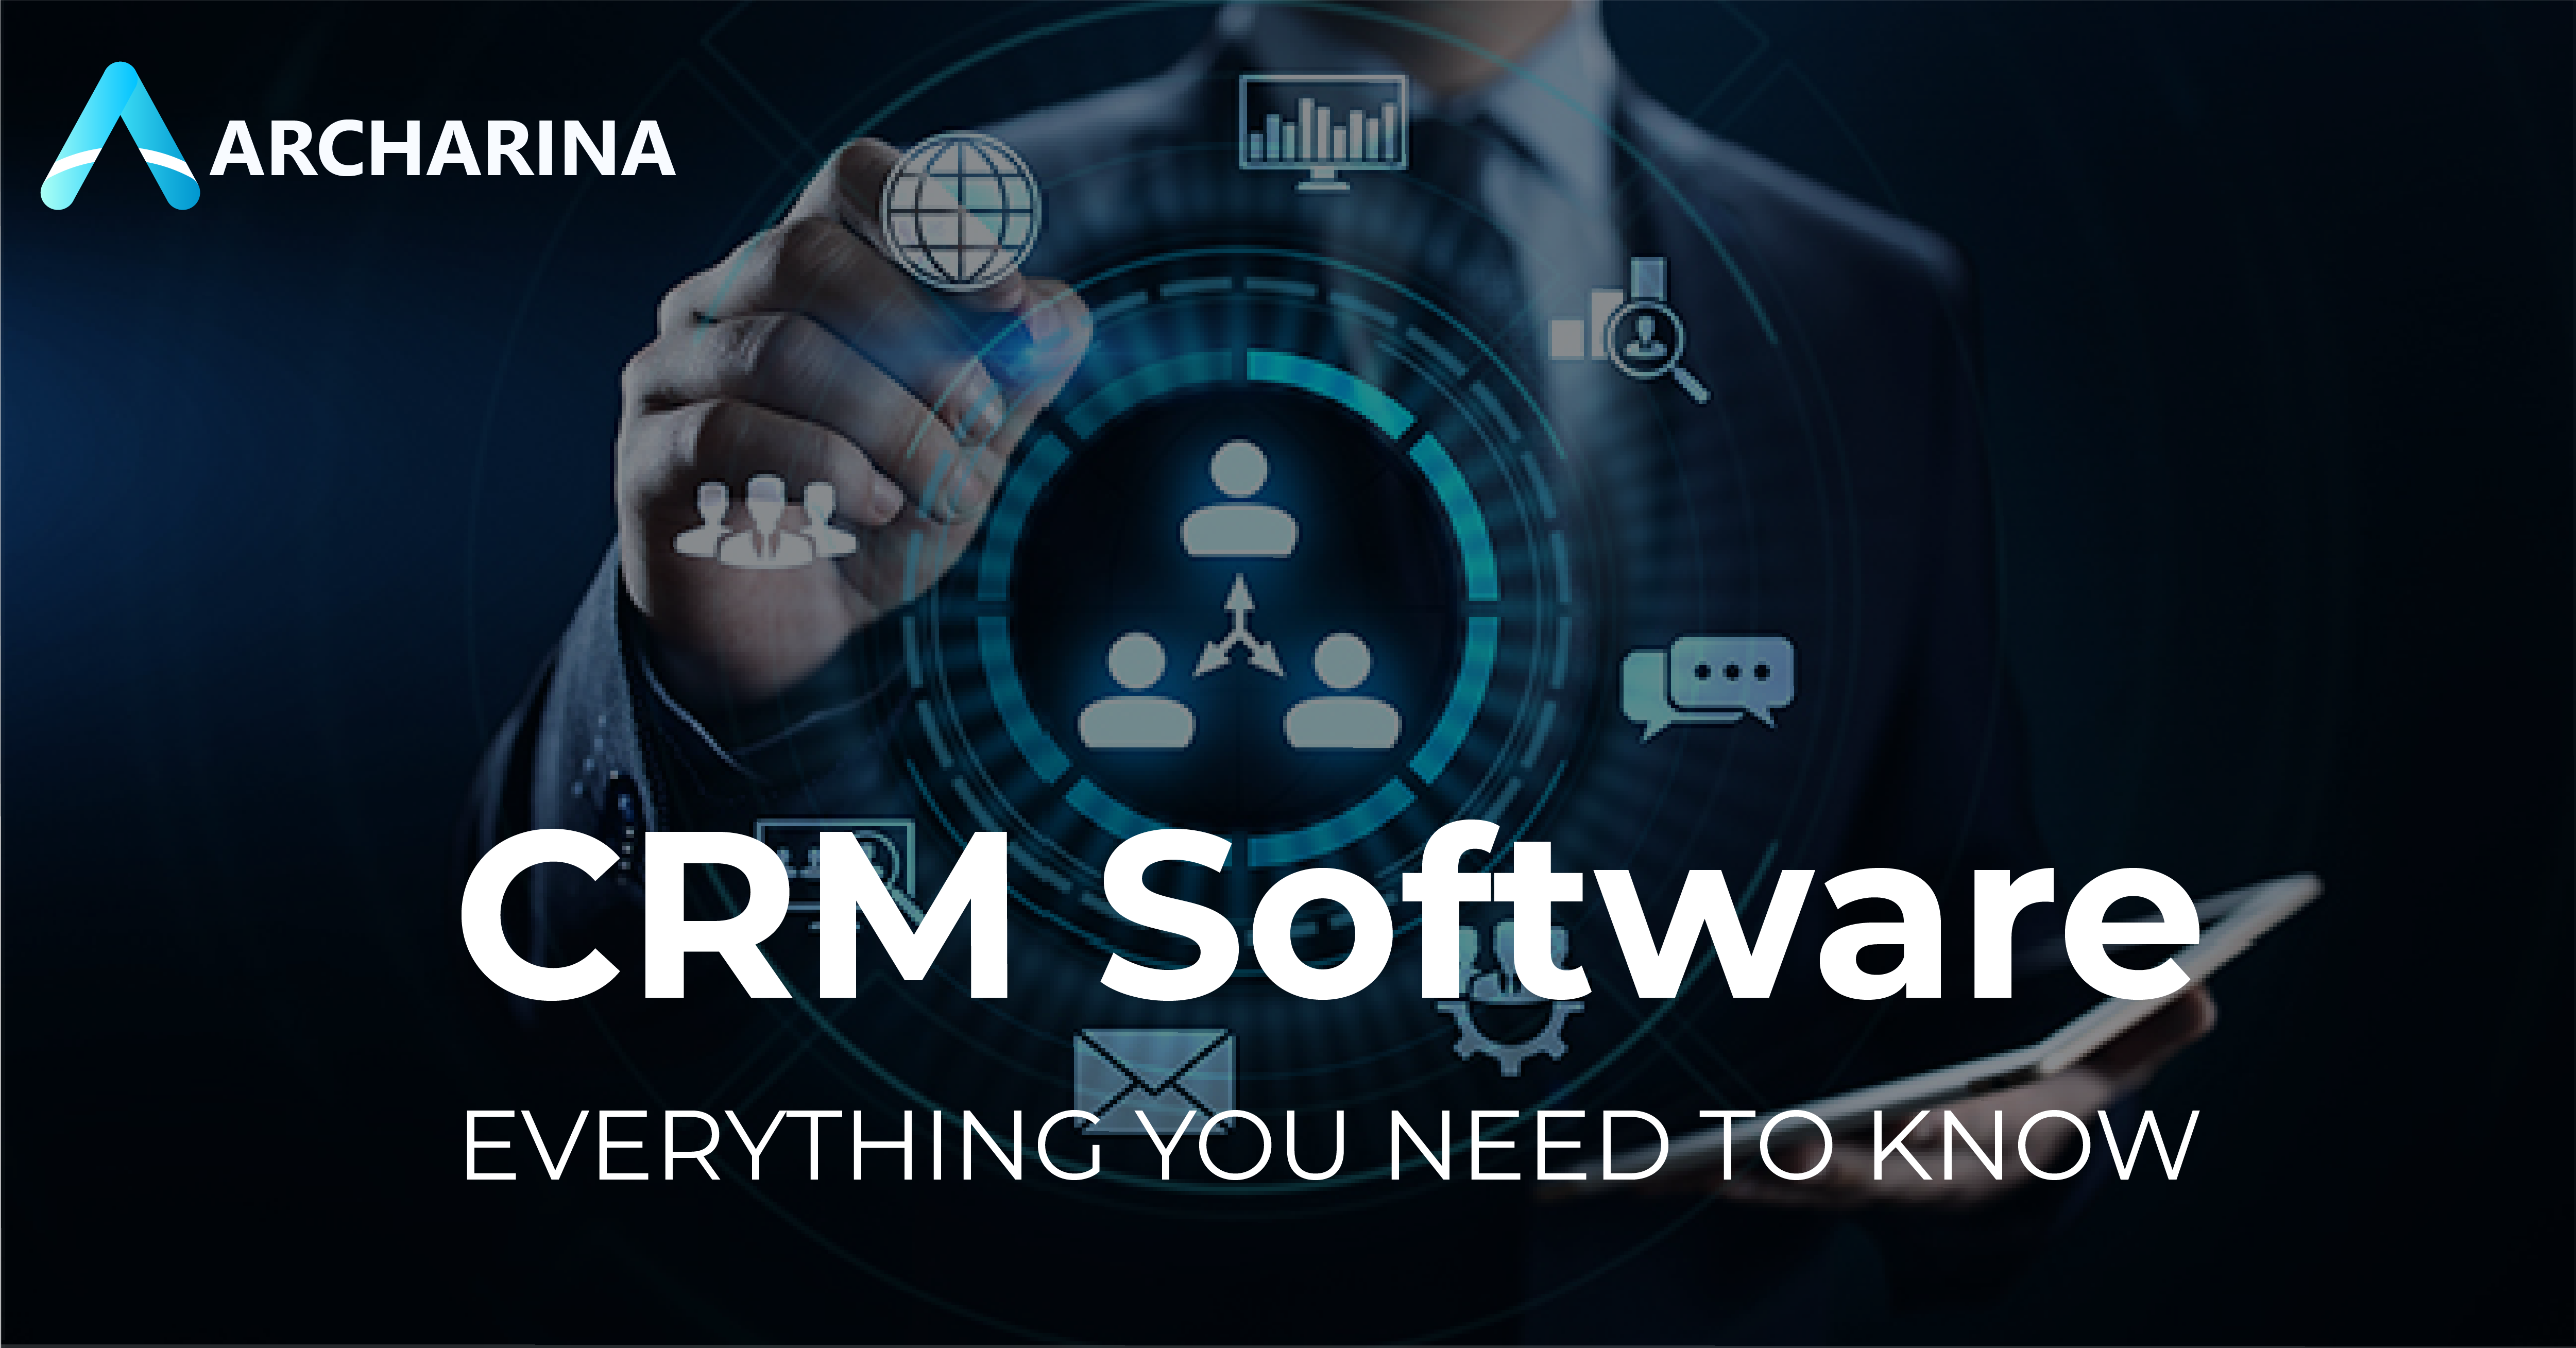 crm-software-you-need-to-know